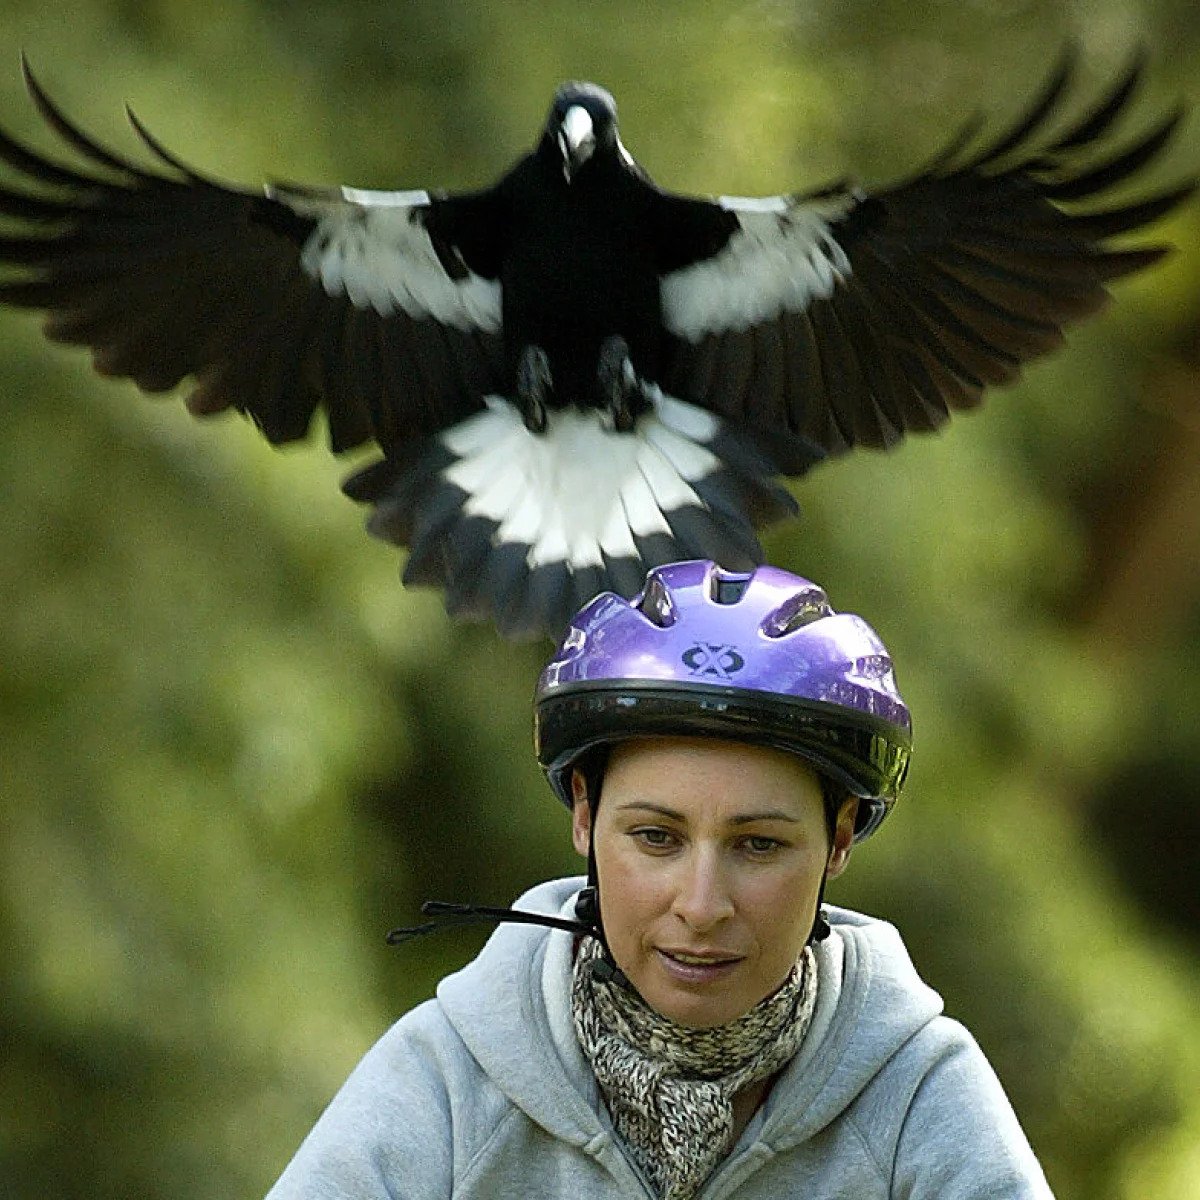 Magpie swooping on a lady bicycle rider